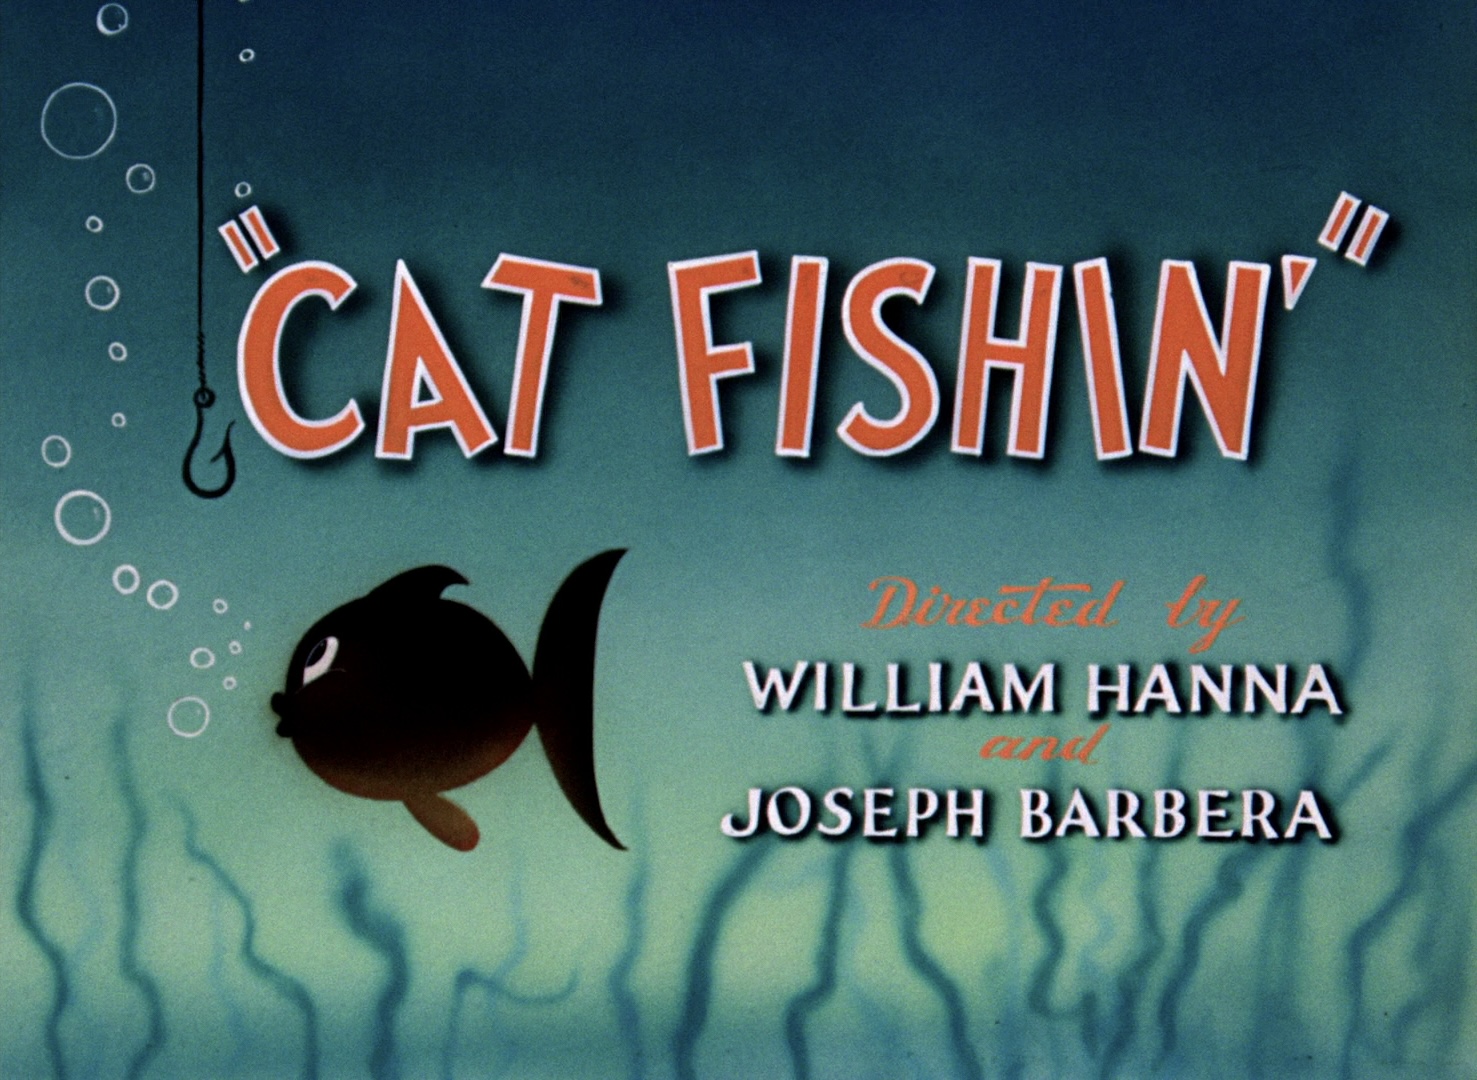 tom and jerry movies cat fishin